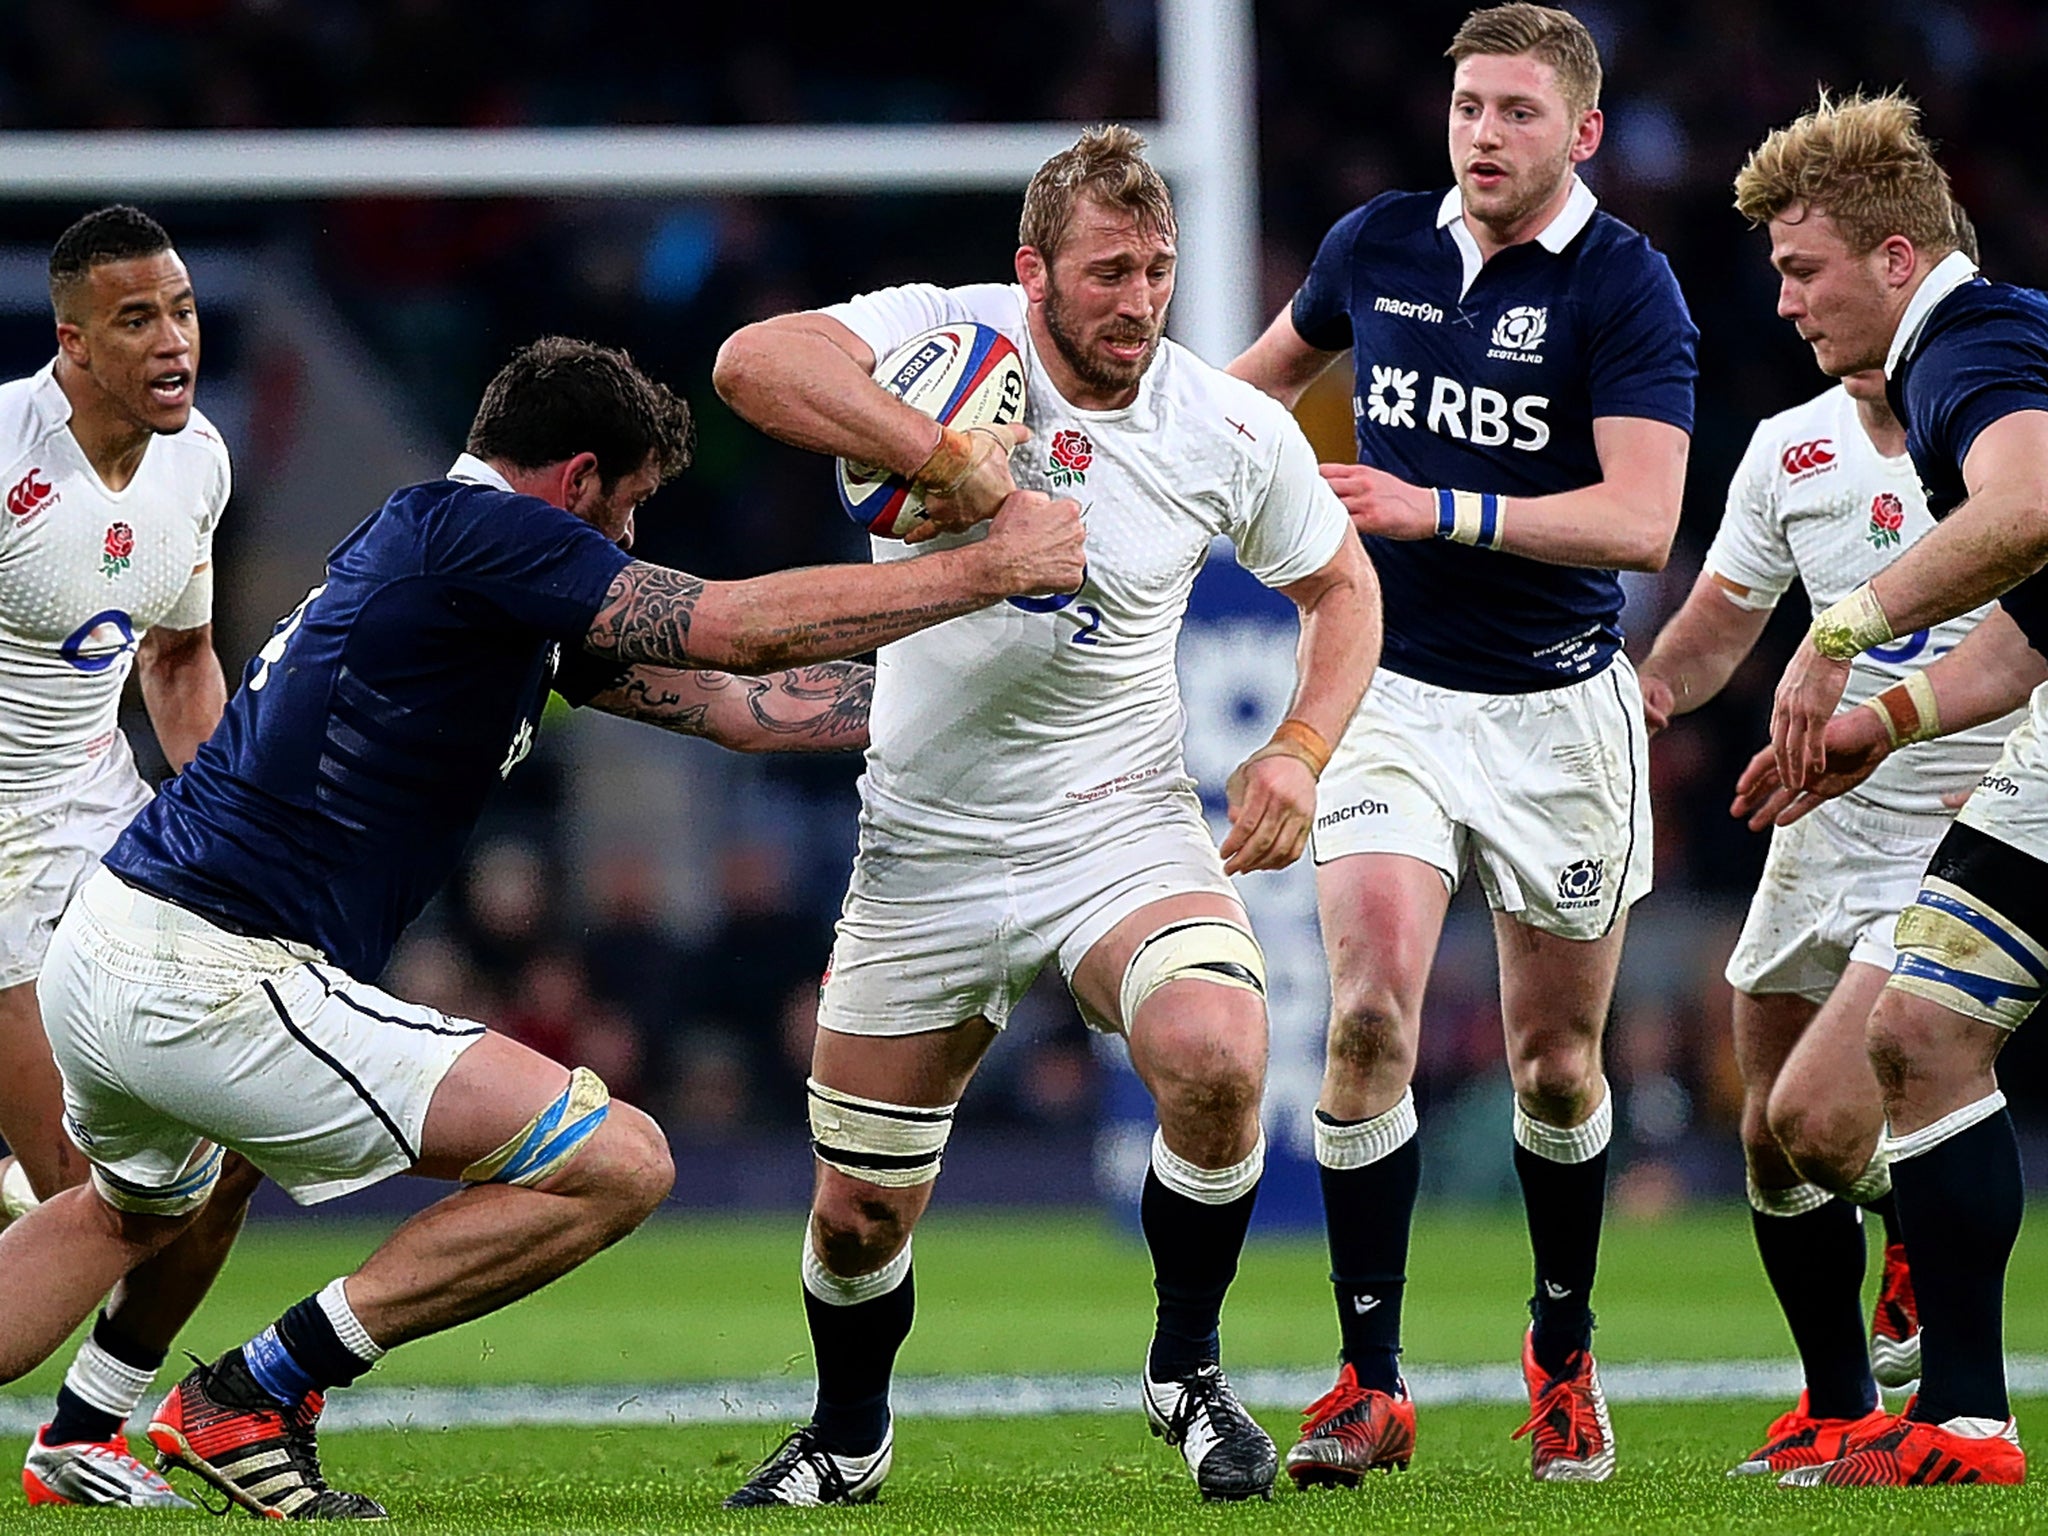 Will England and Scotland leave their mark on the Rugby World Cup?